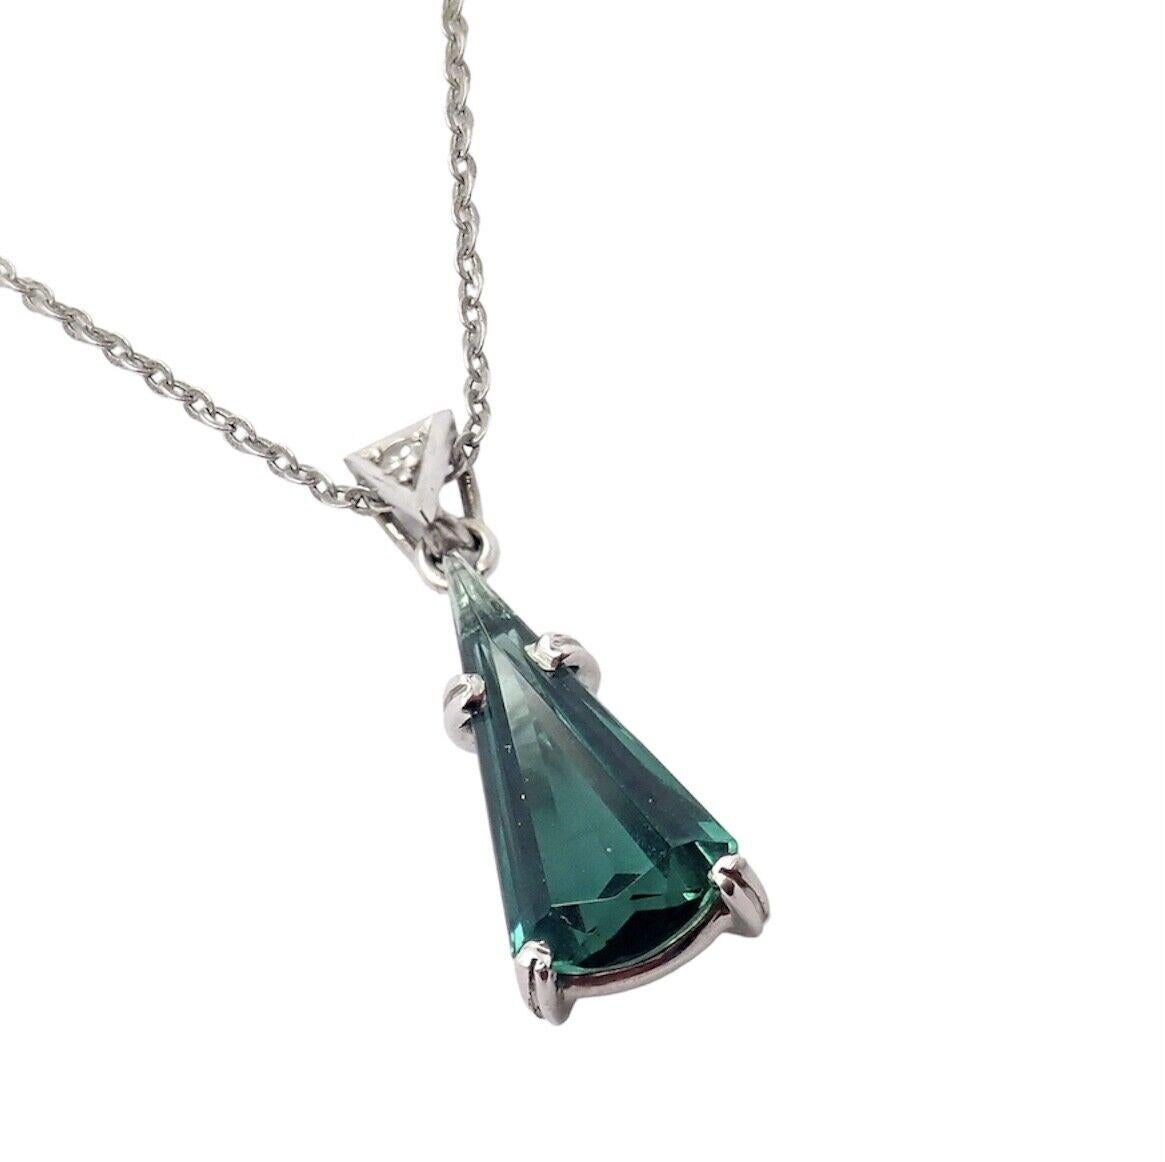 18k White Gold Diamond Blue Green Tourmaline Pendant Necklace by H. Stern. 
With 1 round brilliant cut white diamonds total weight approximately 0.02ctw
1 fancy pear/triangle shape deep blue/green tourmaline 6mm x 14.5mm
Details: 
Length: